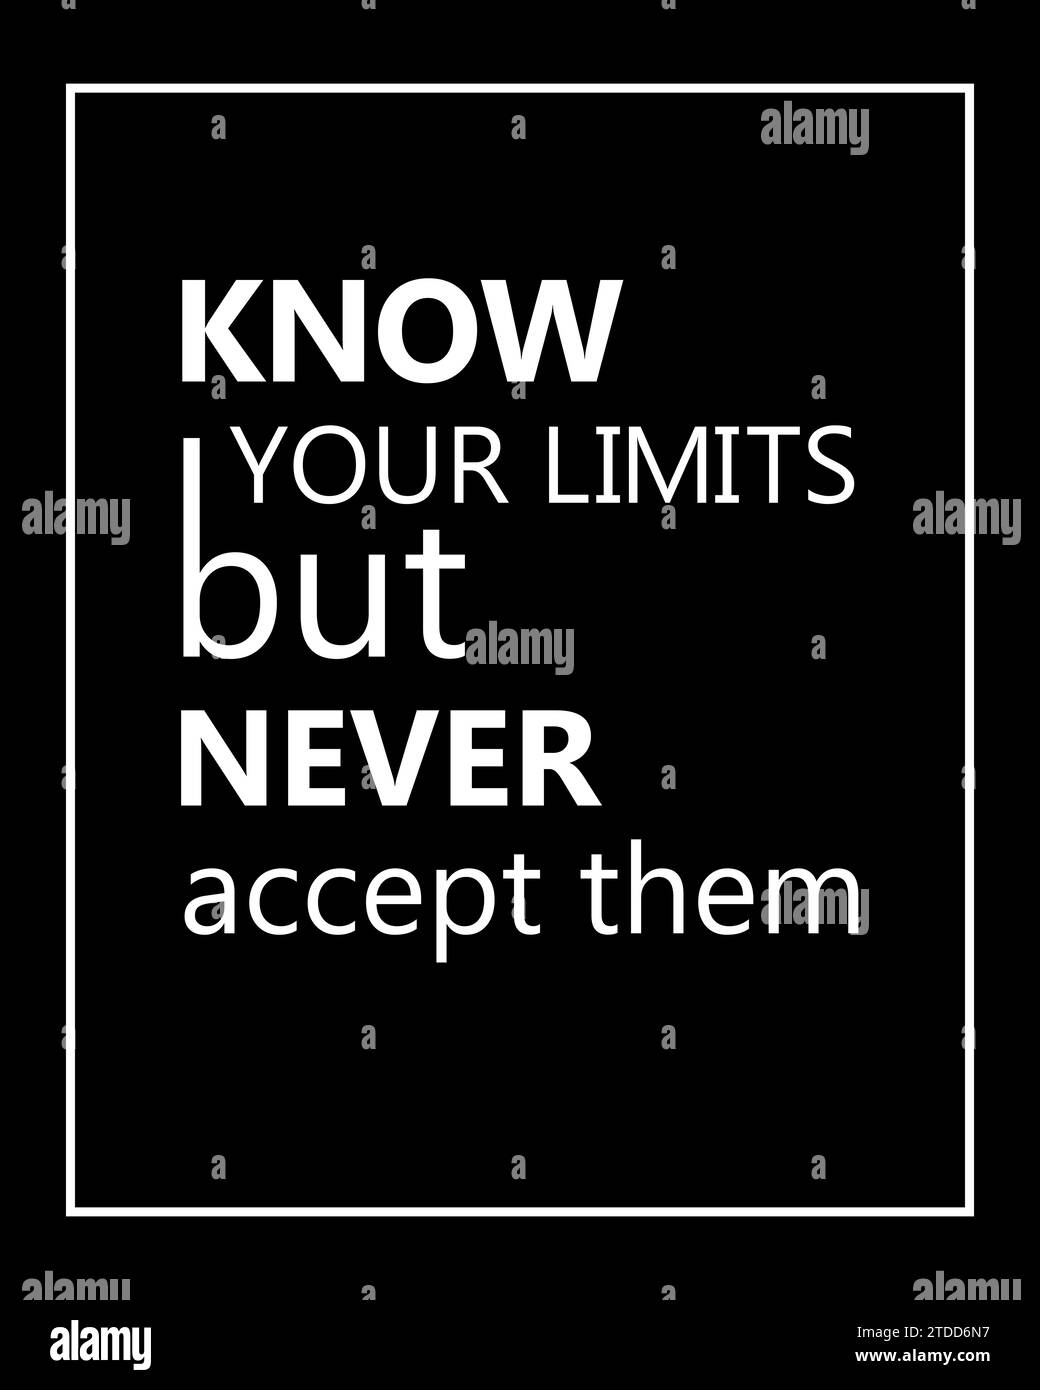 Know Your Limits But Never Accept Them motivational poster/quote for the wall illustration Stock Photo